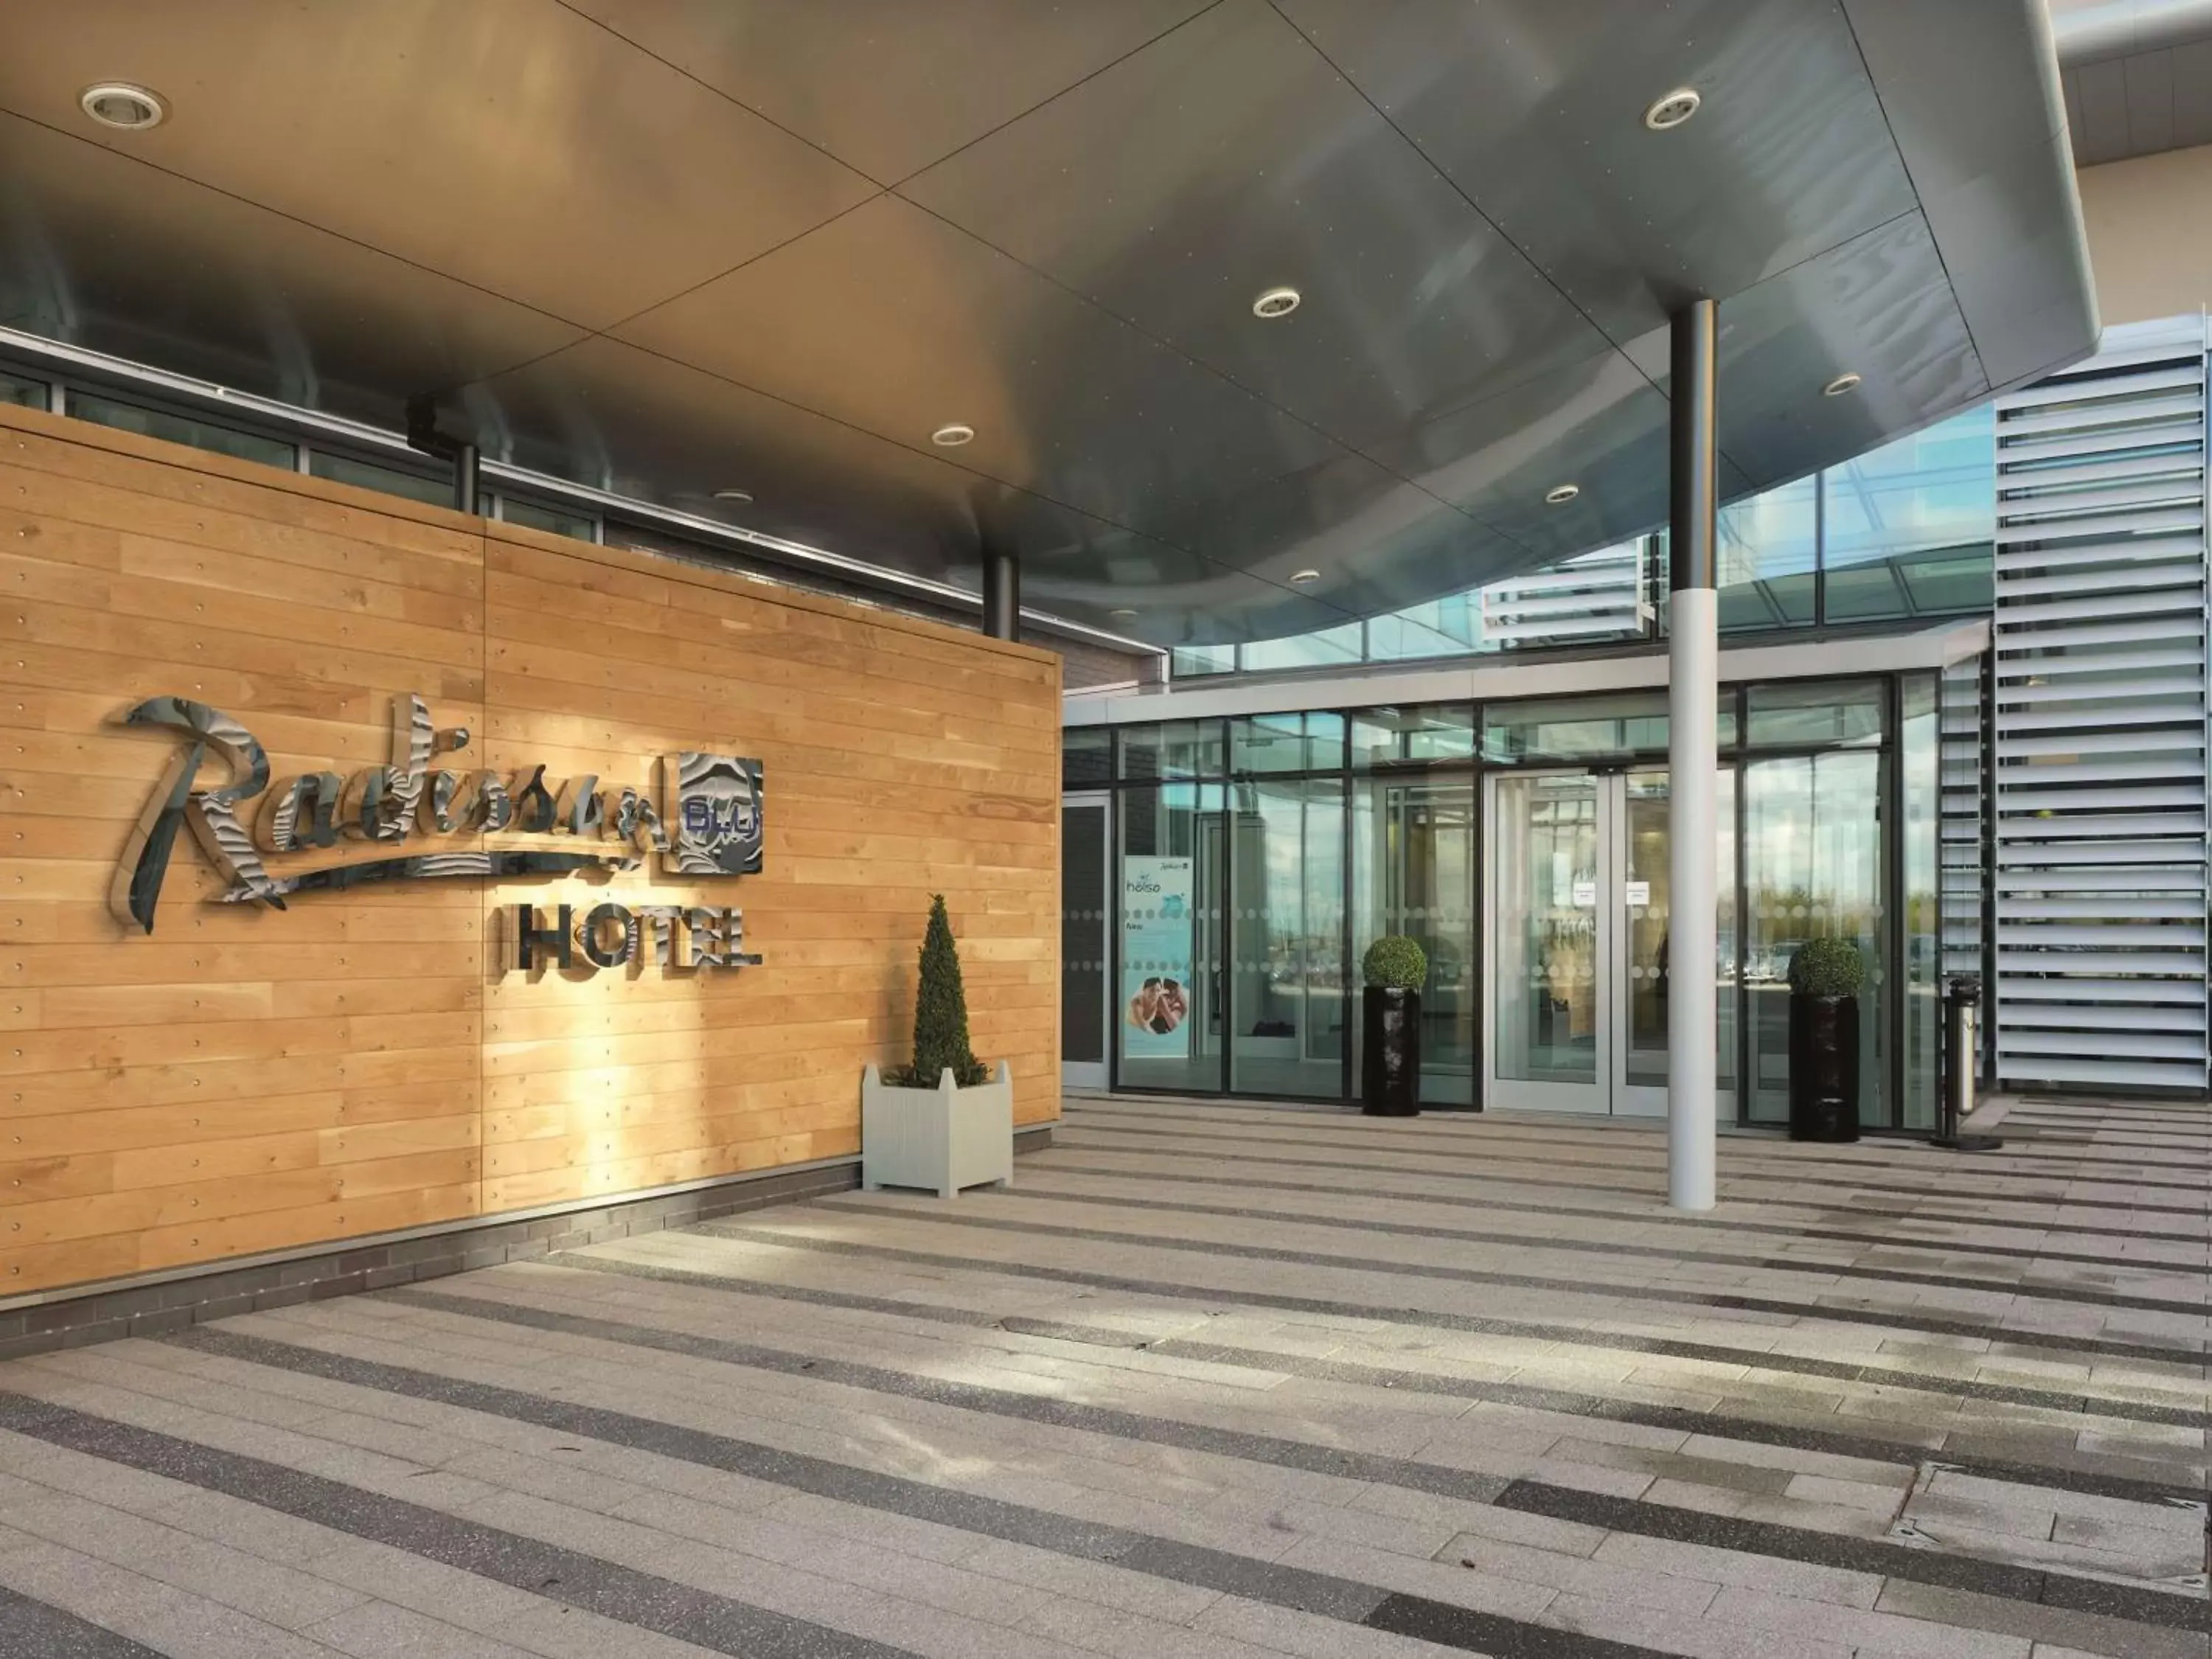 Property building in Radisson Blu Hotel East Midlands Airport